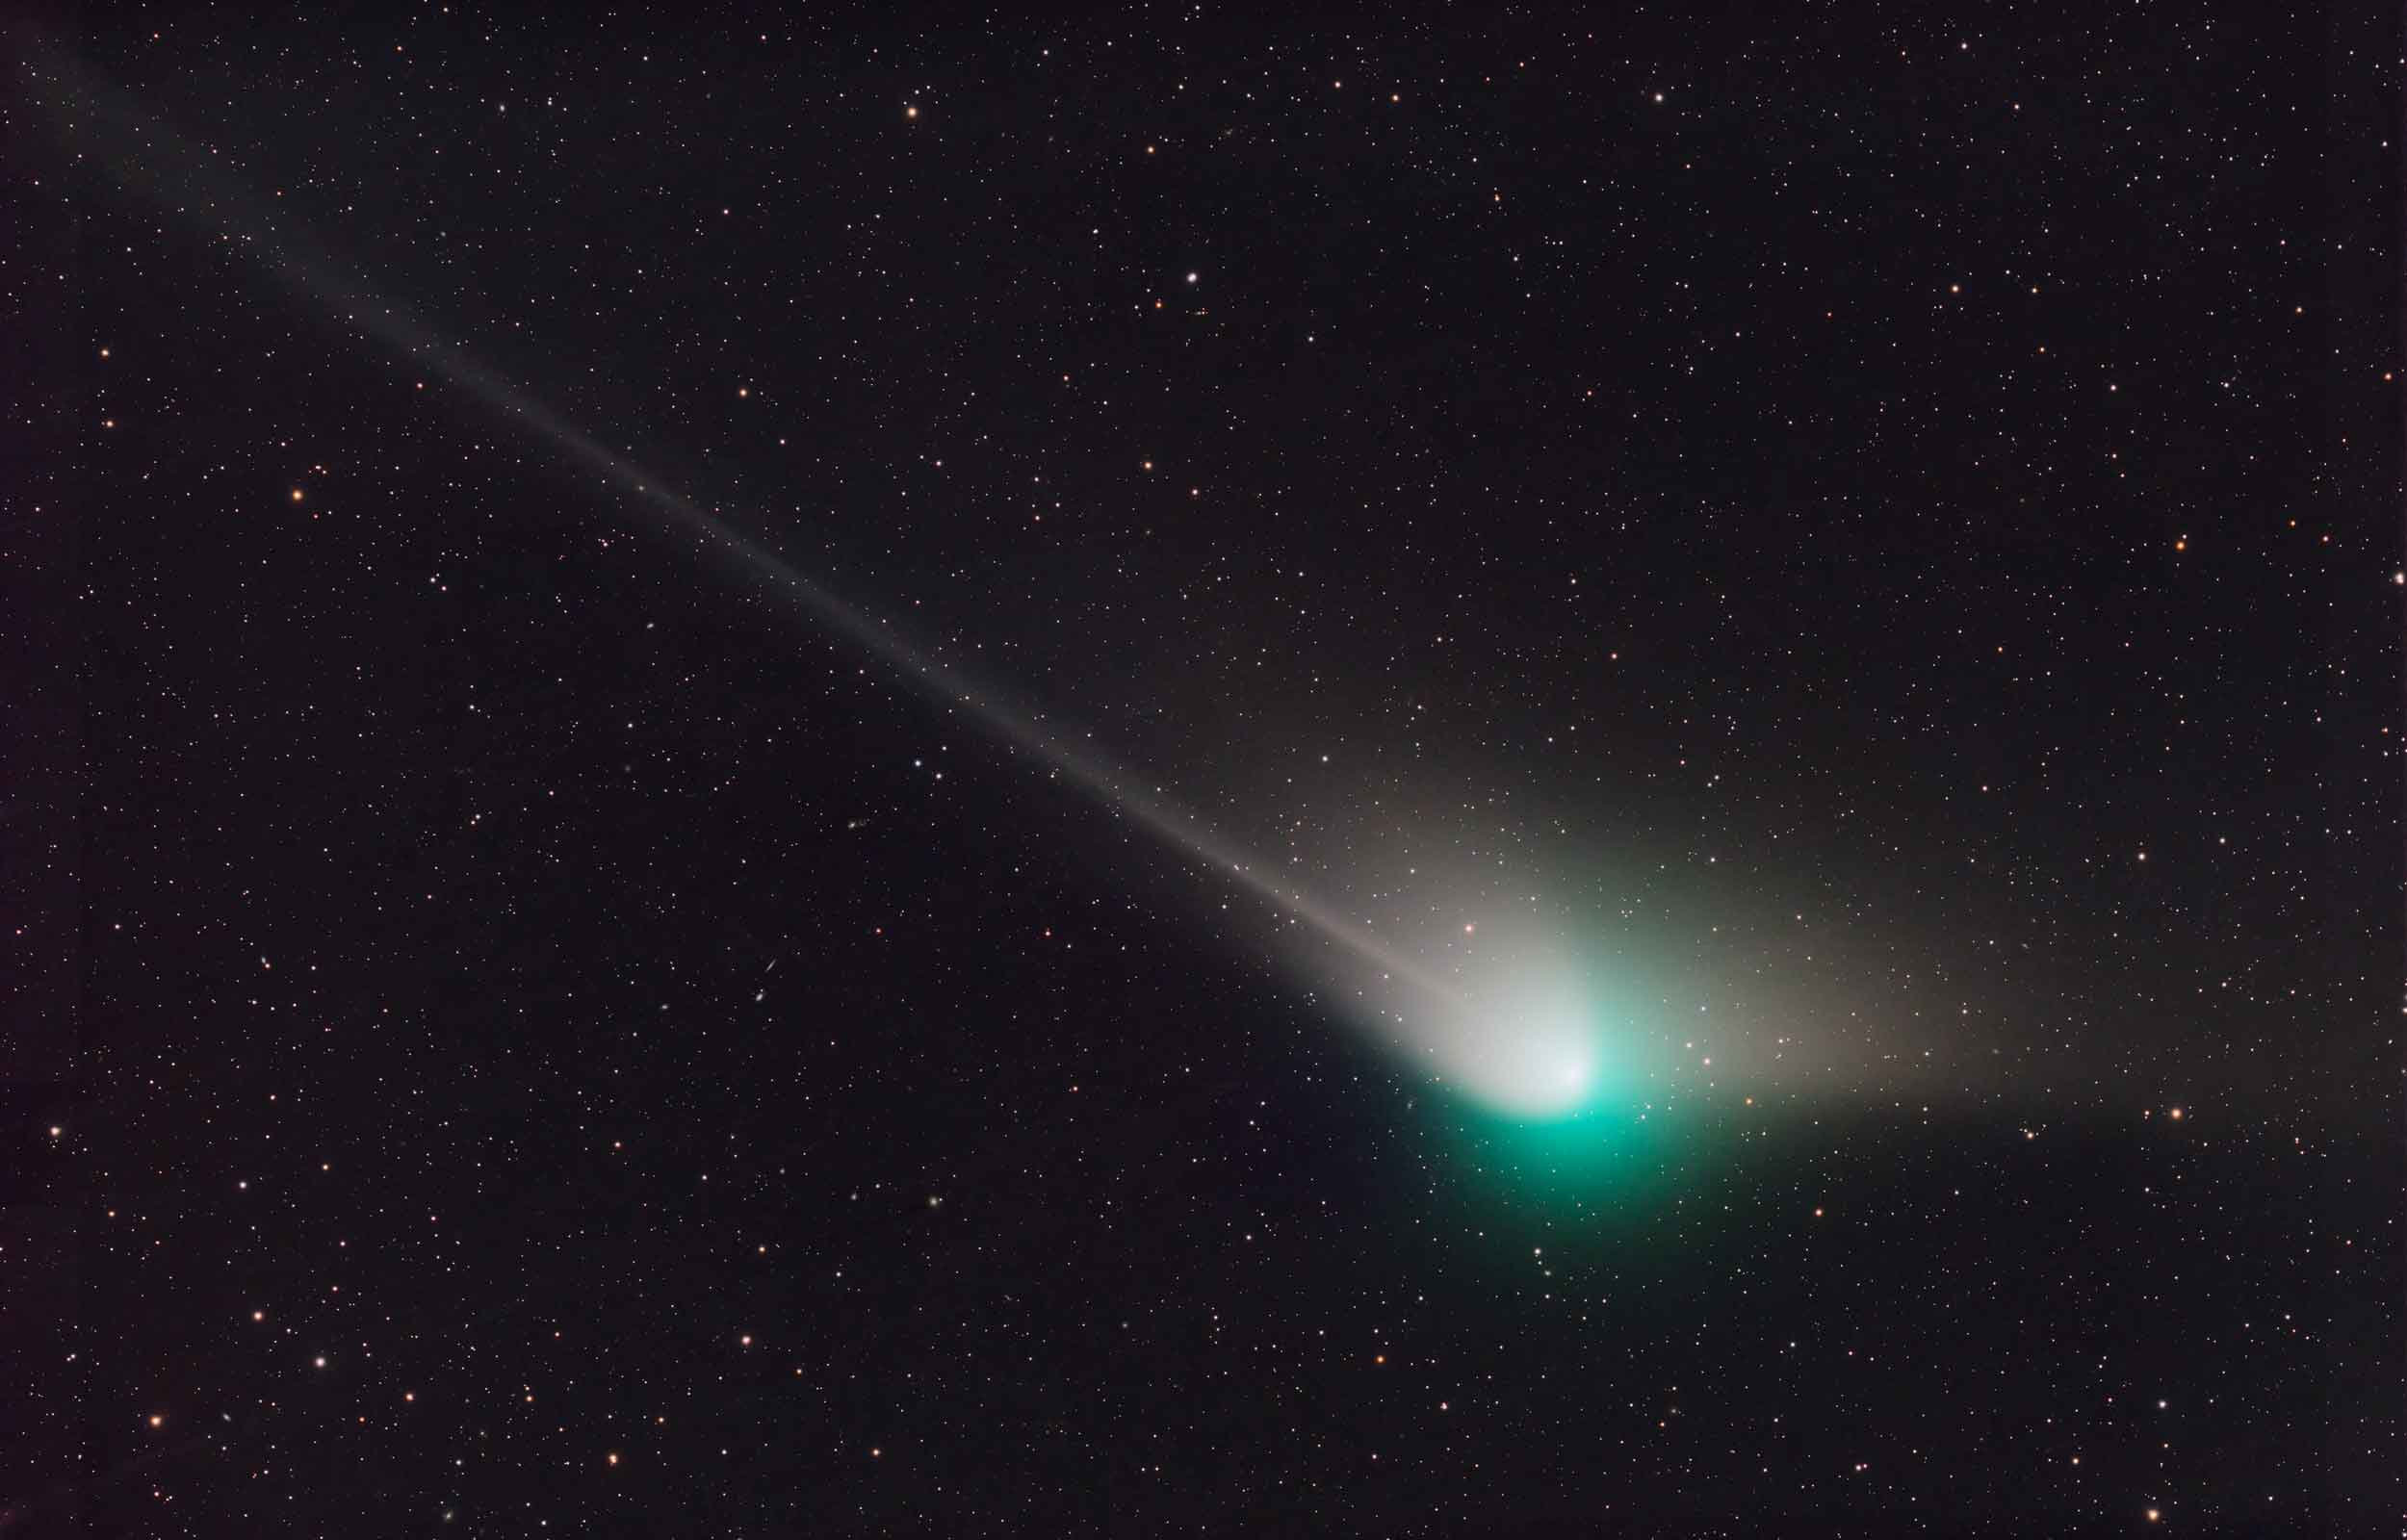 A comet with a green halo and tail against a starry background